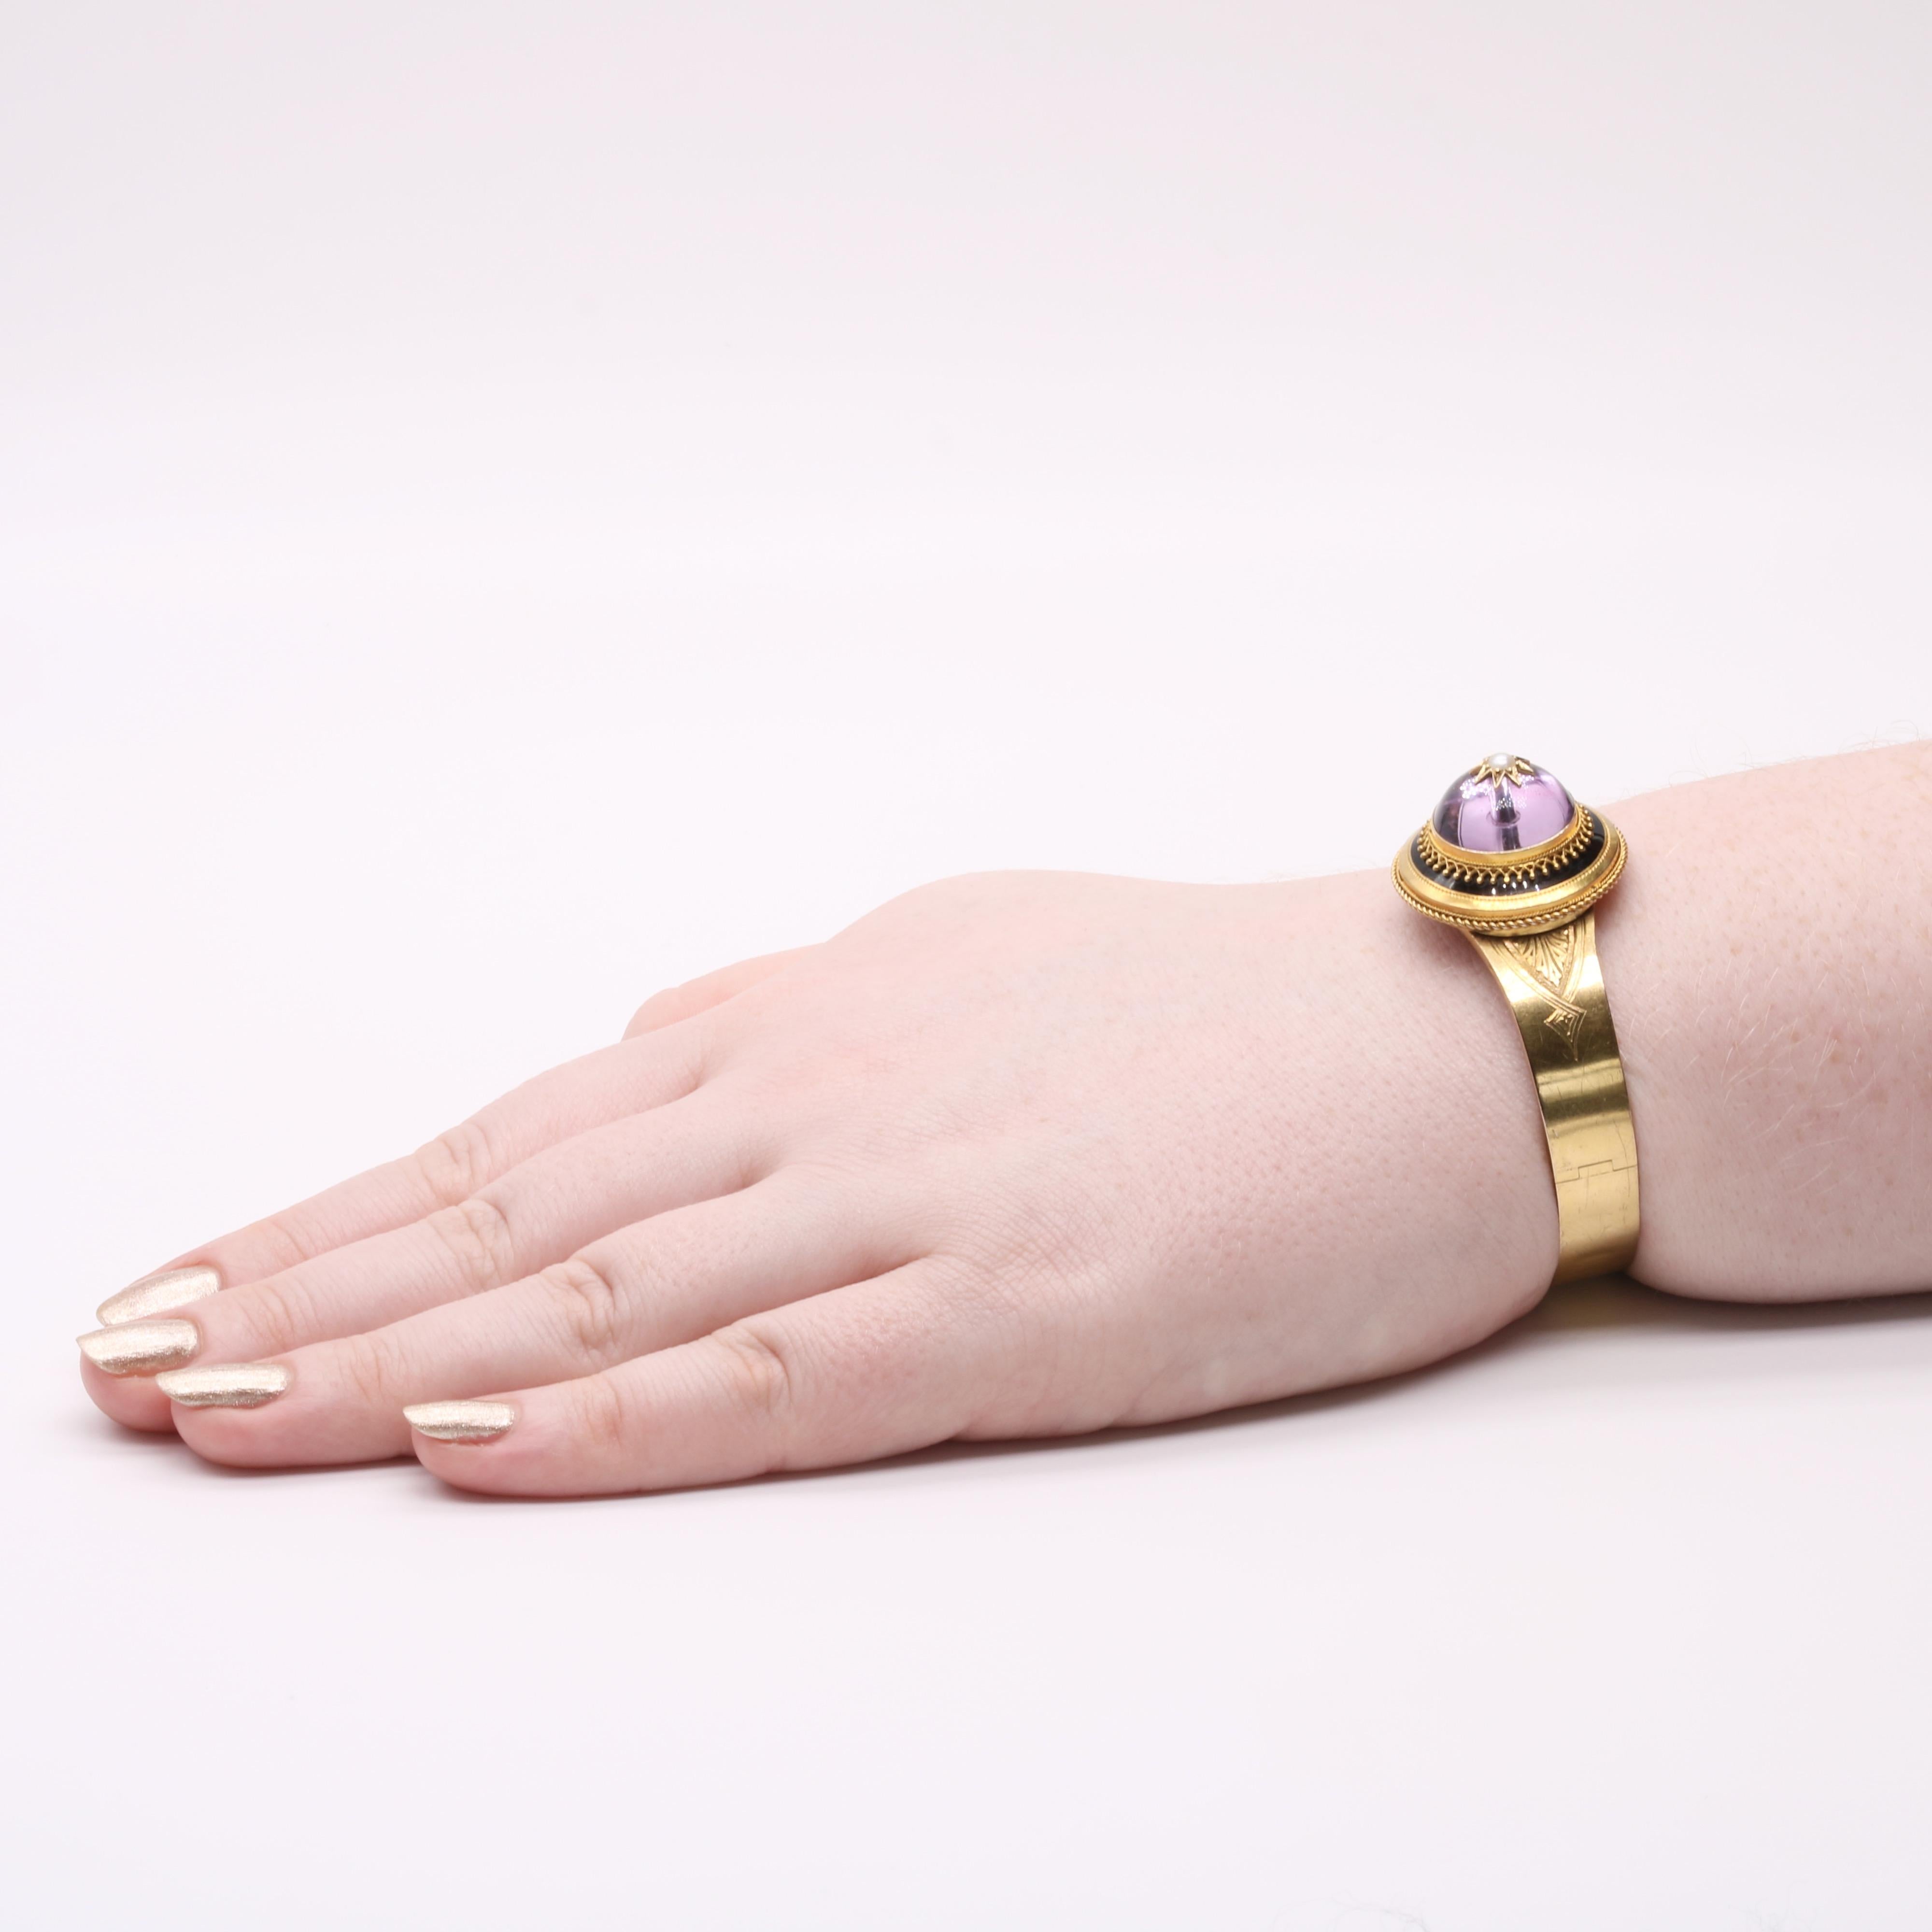 An antique gold, amethyst, pearl and enamel bracelet set with a cabochon amethyst, one seed pearl and adorned with black enamel, crafted from 18 karat yellow gold.  

The high domed amethyst cabochon is a beautiful lilac hue, which appears as a